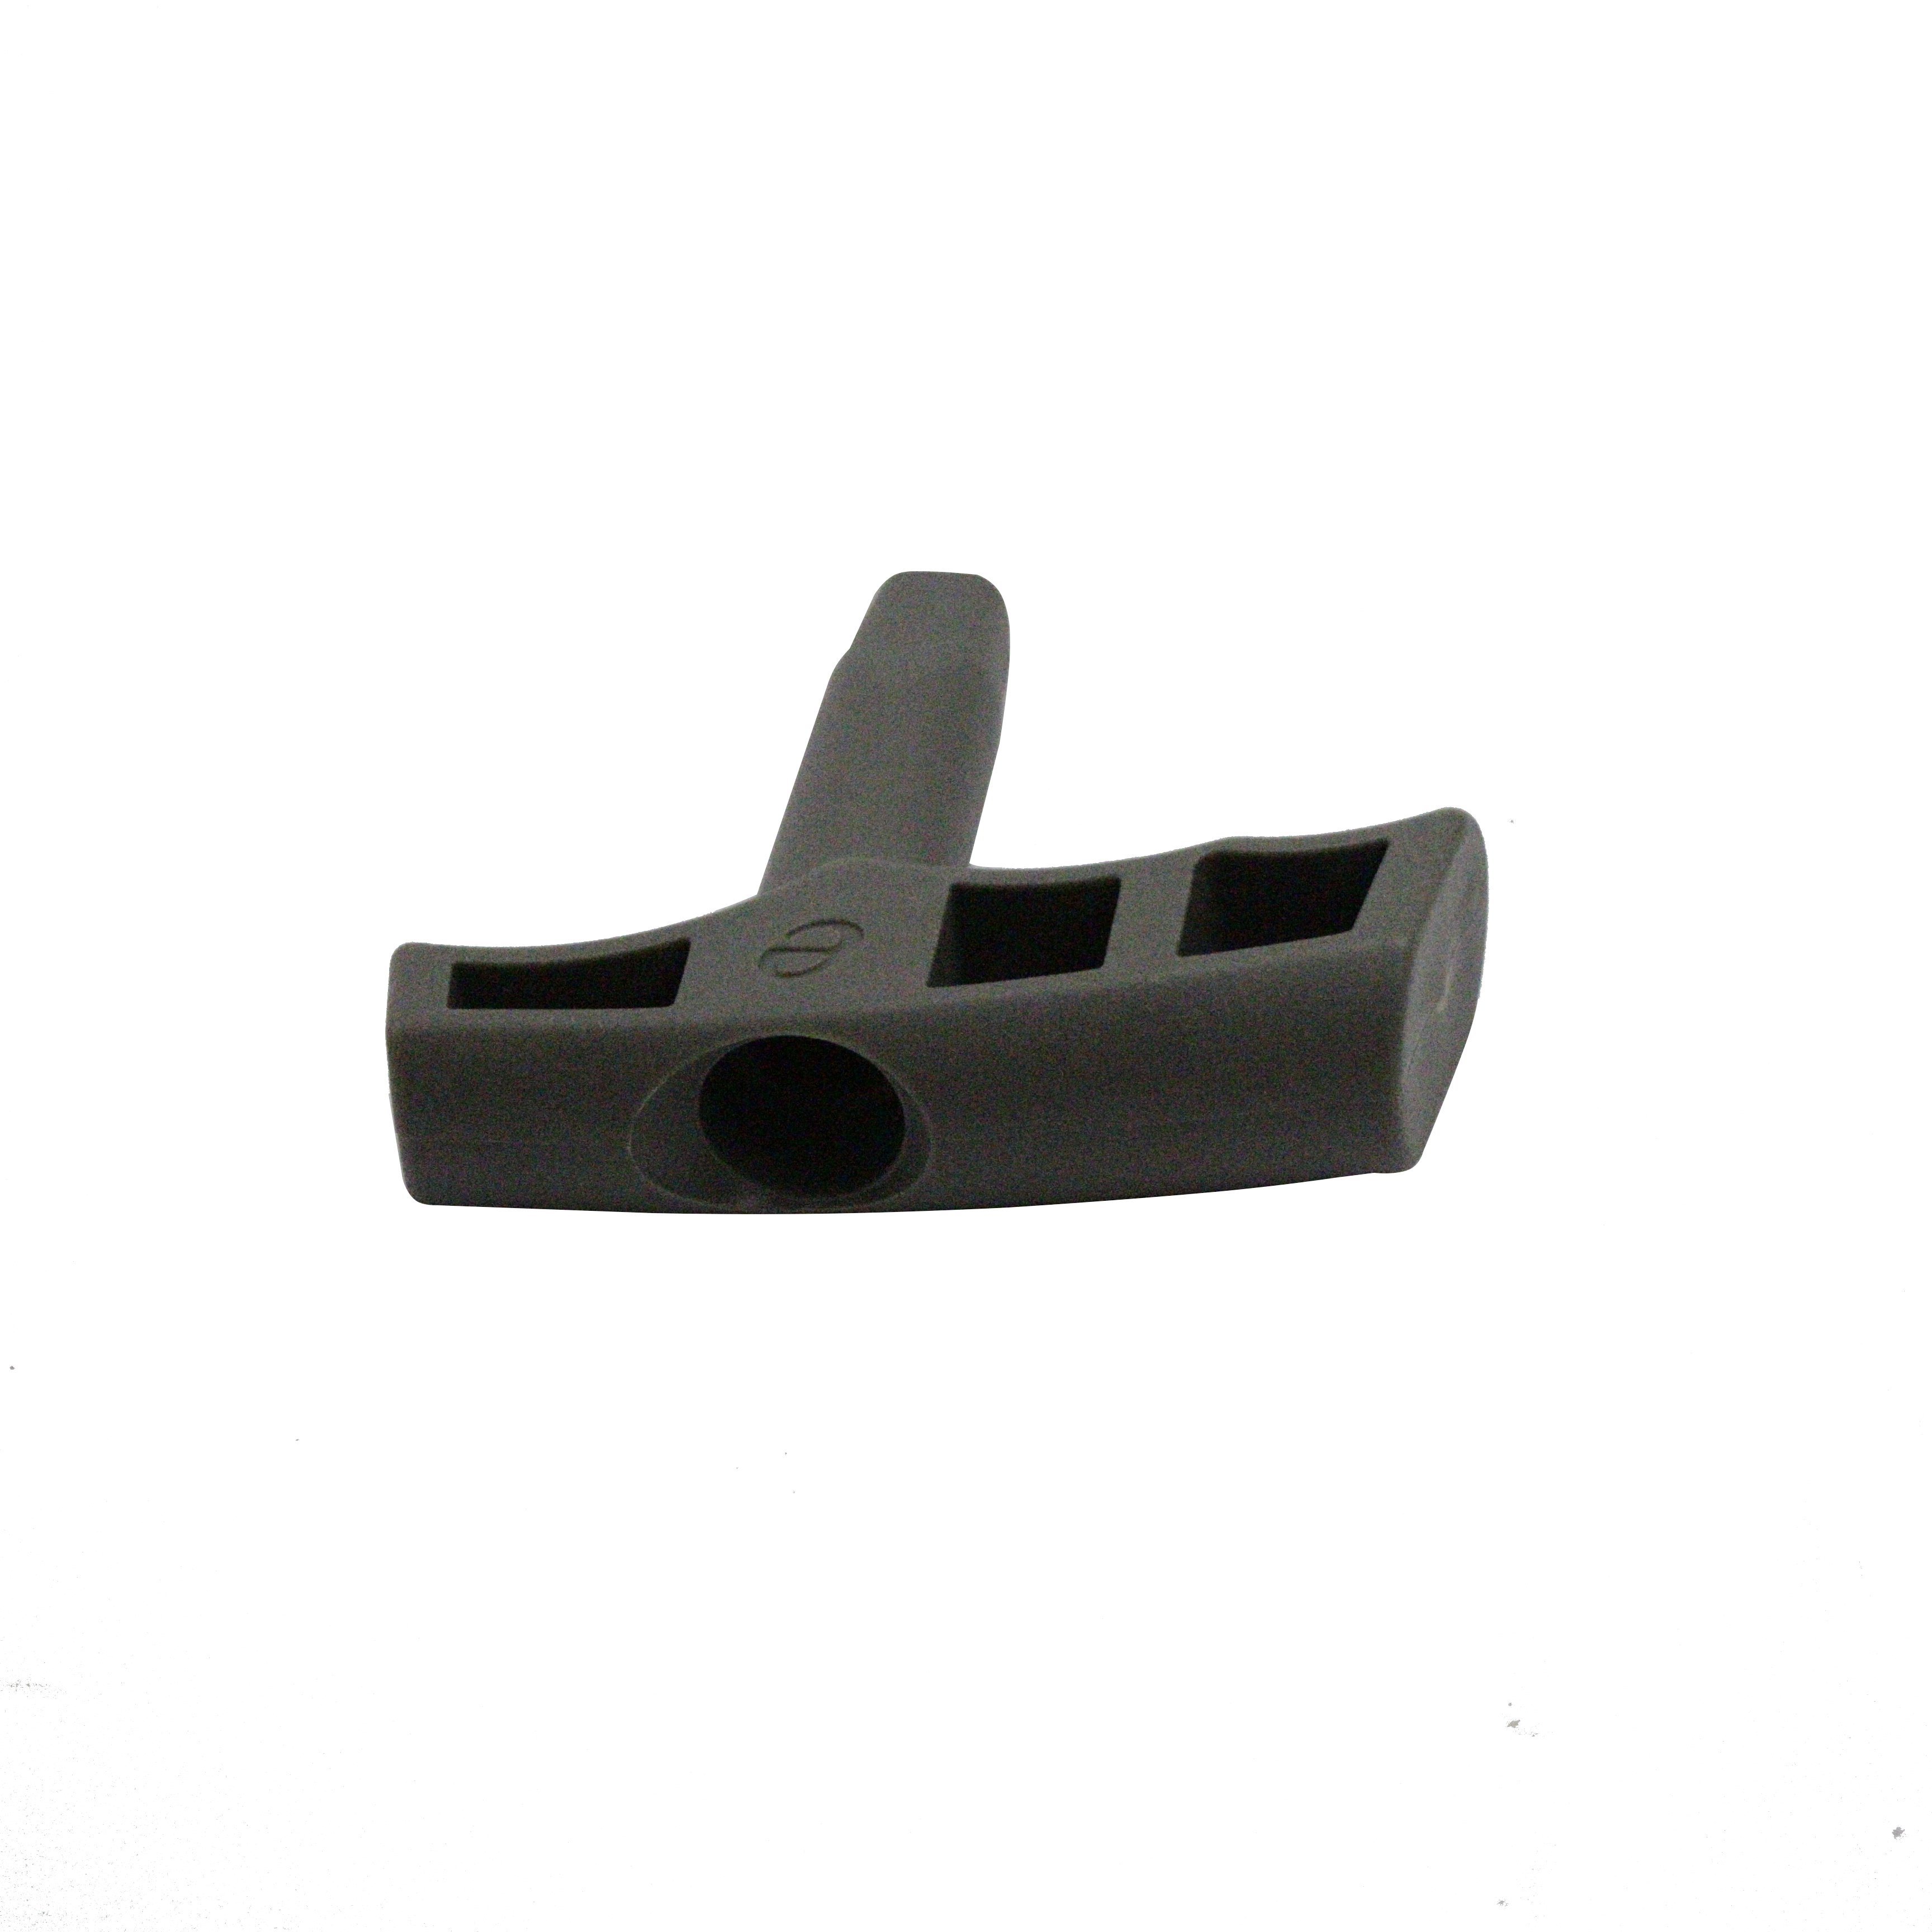 Recoil Starter Handle For Joncutter G3800 Chainsaw